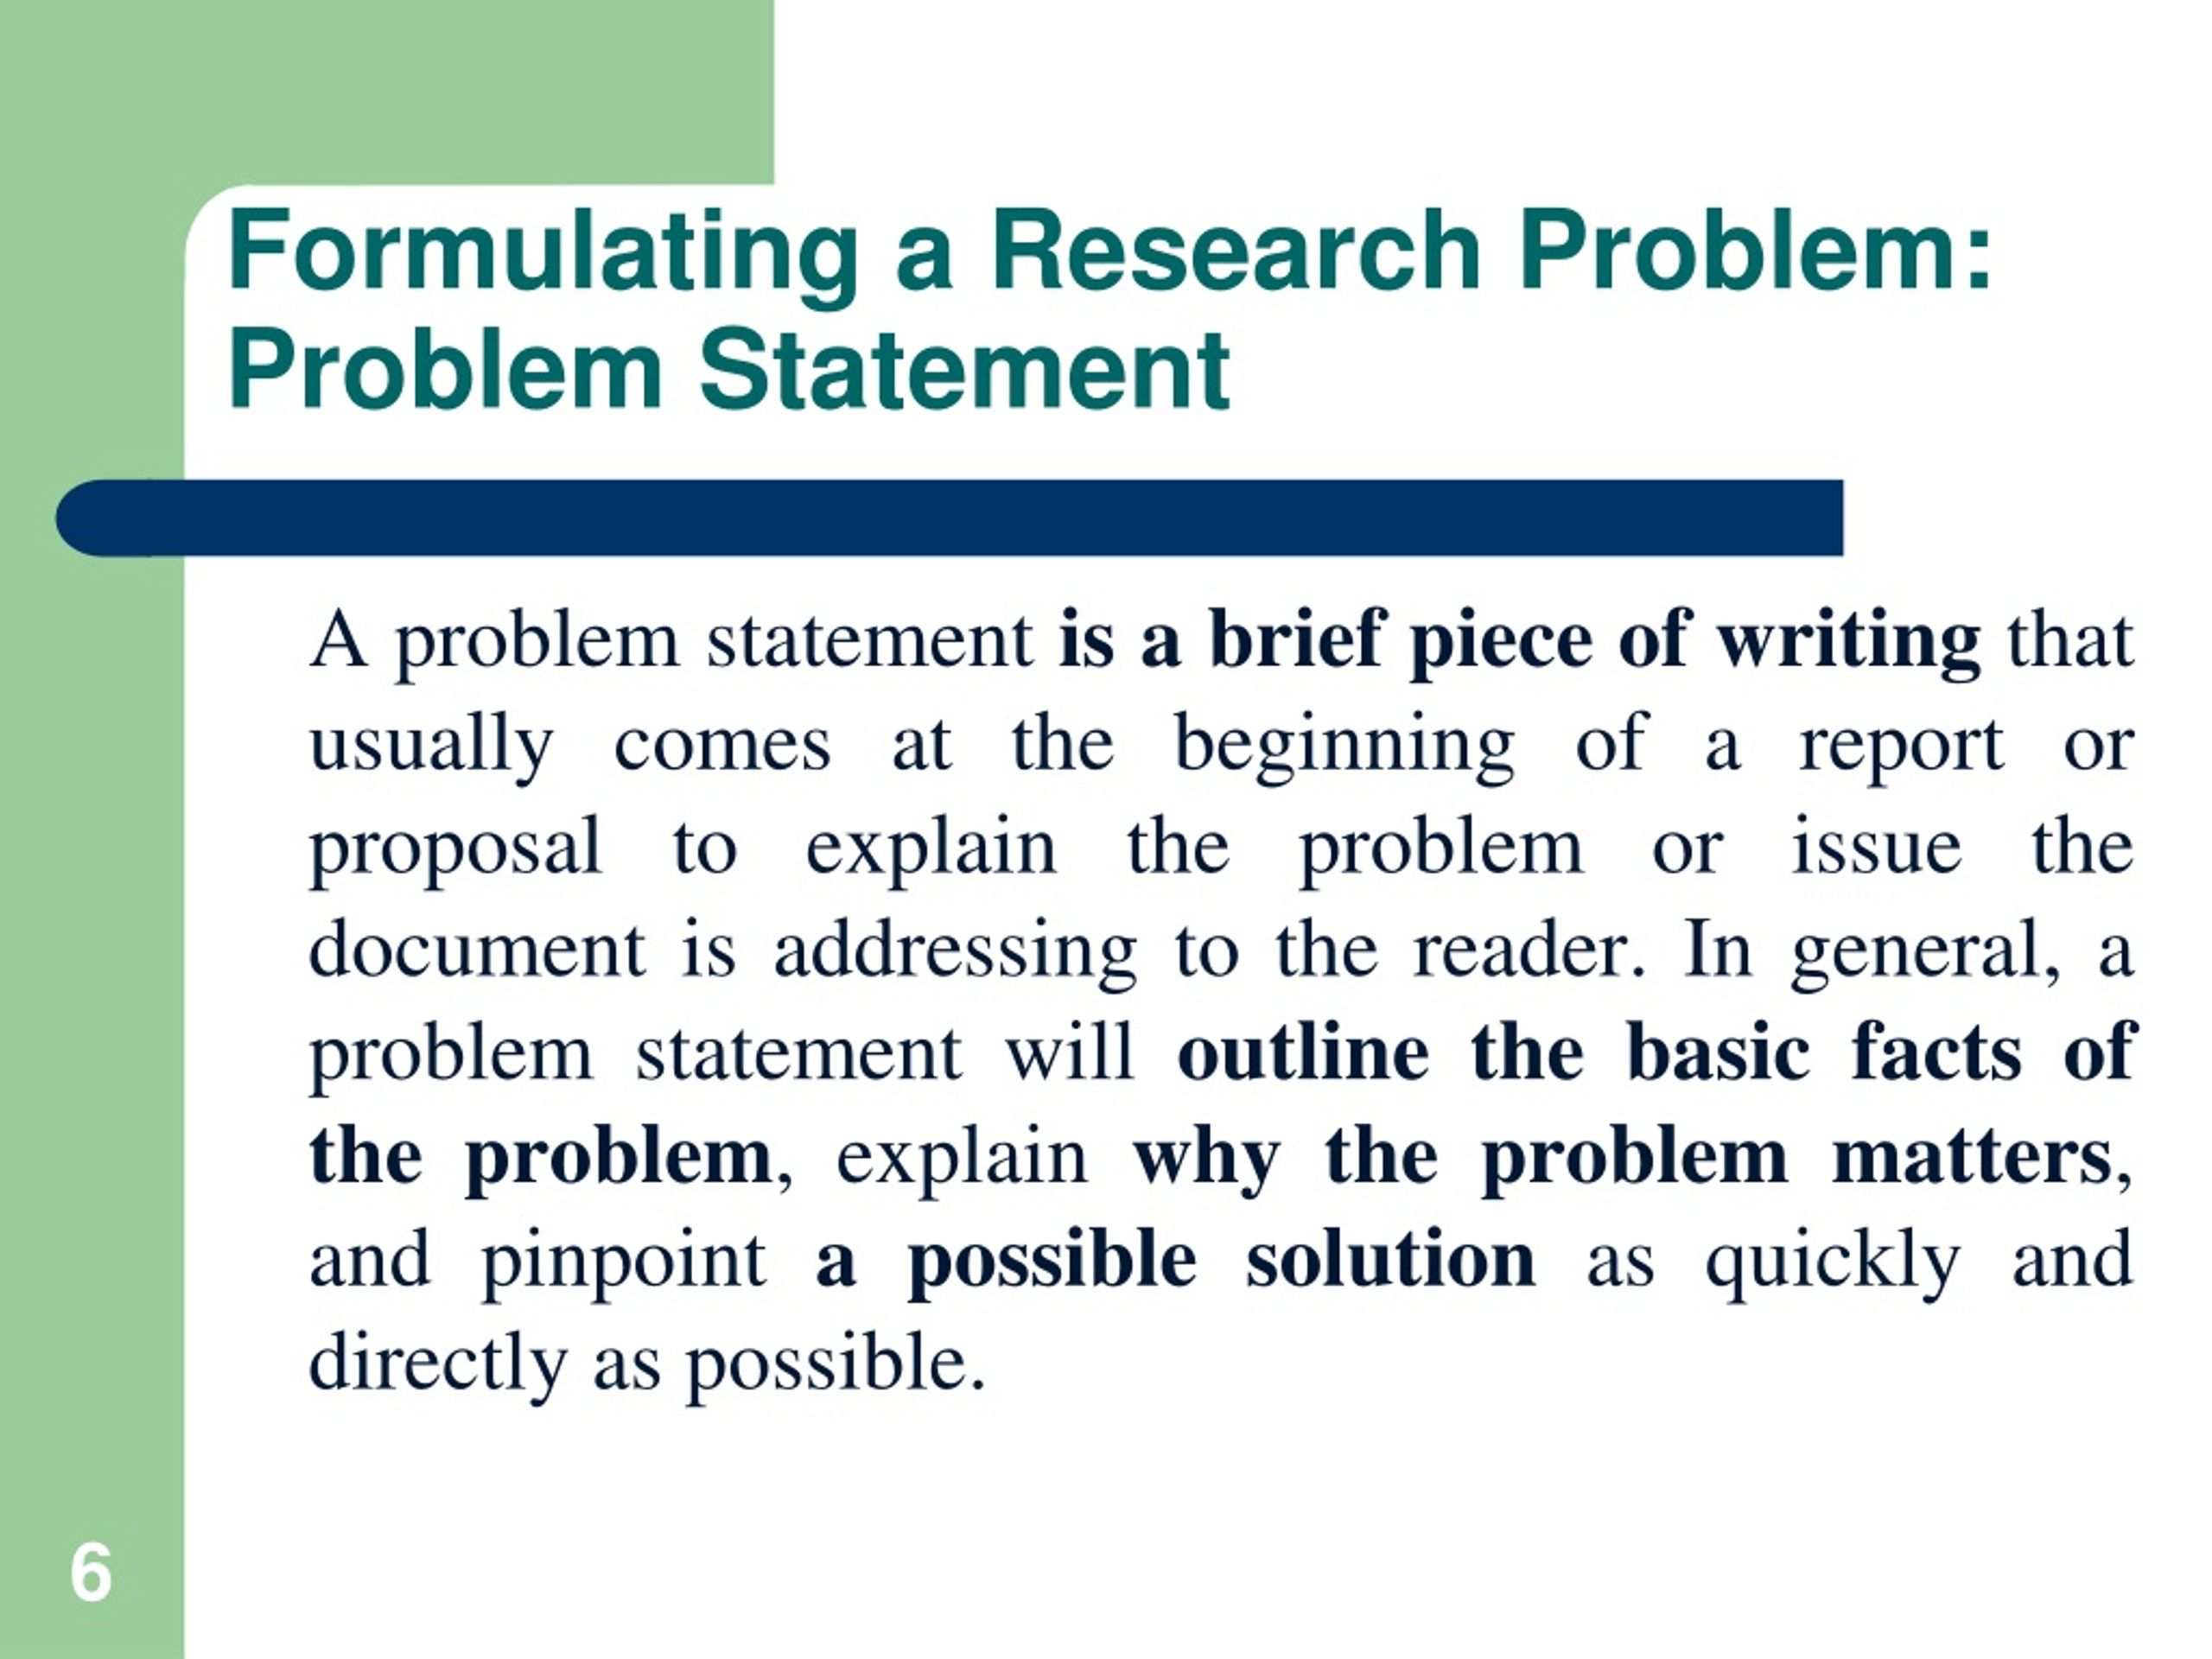 research problem statement ppt